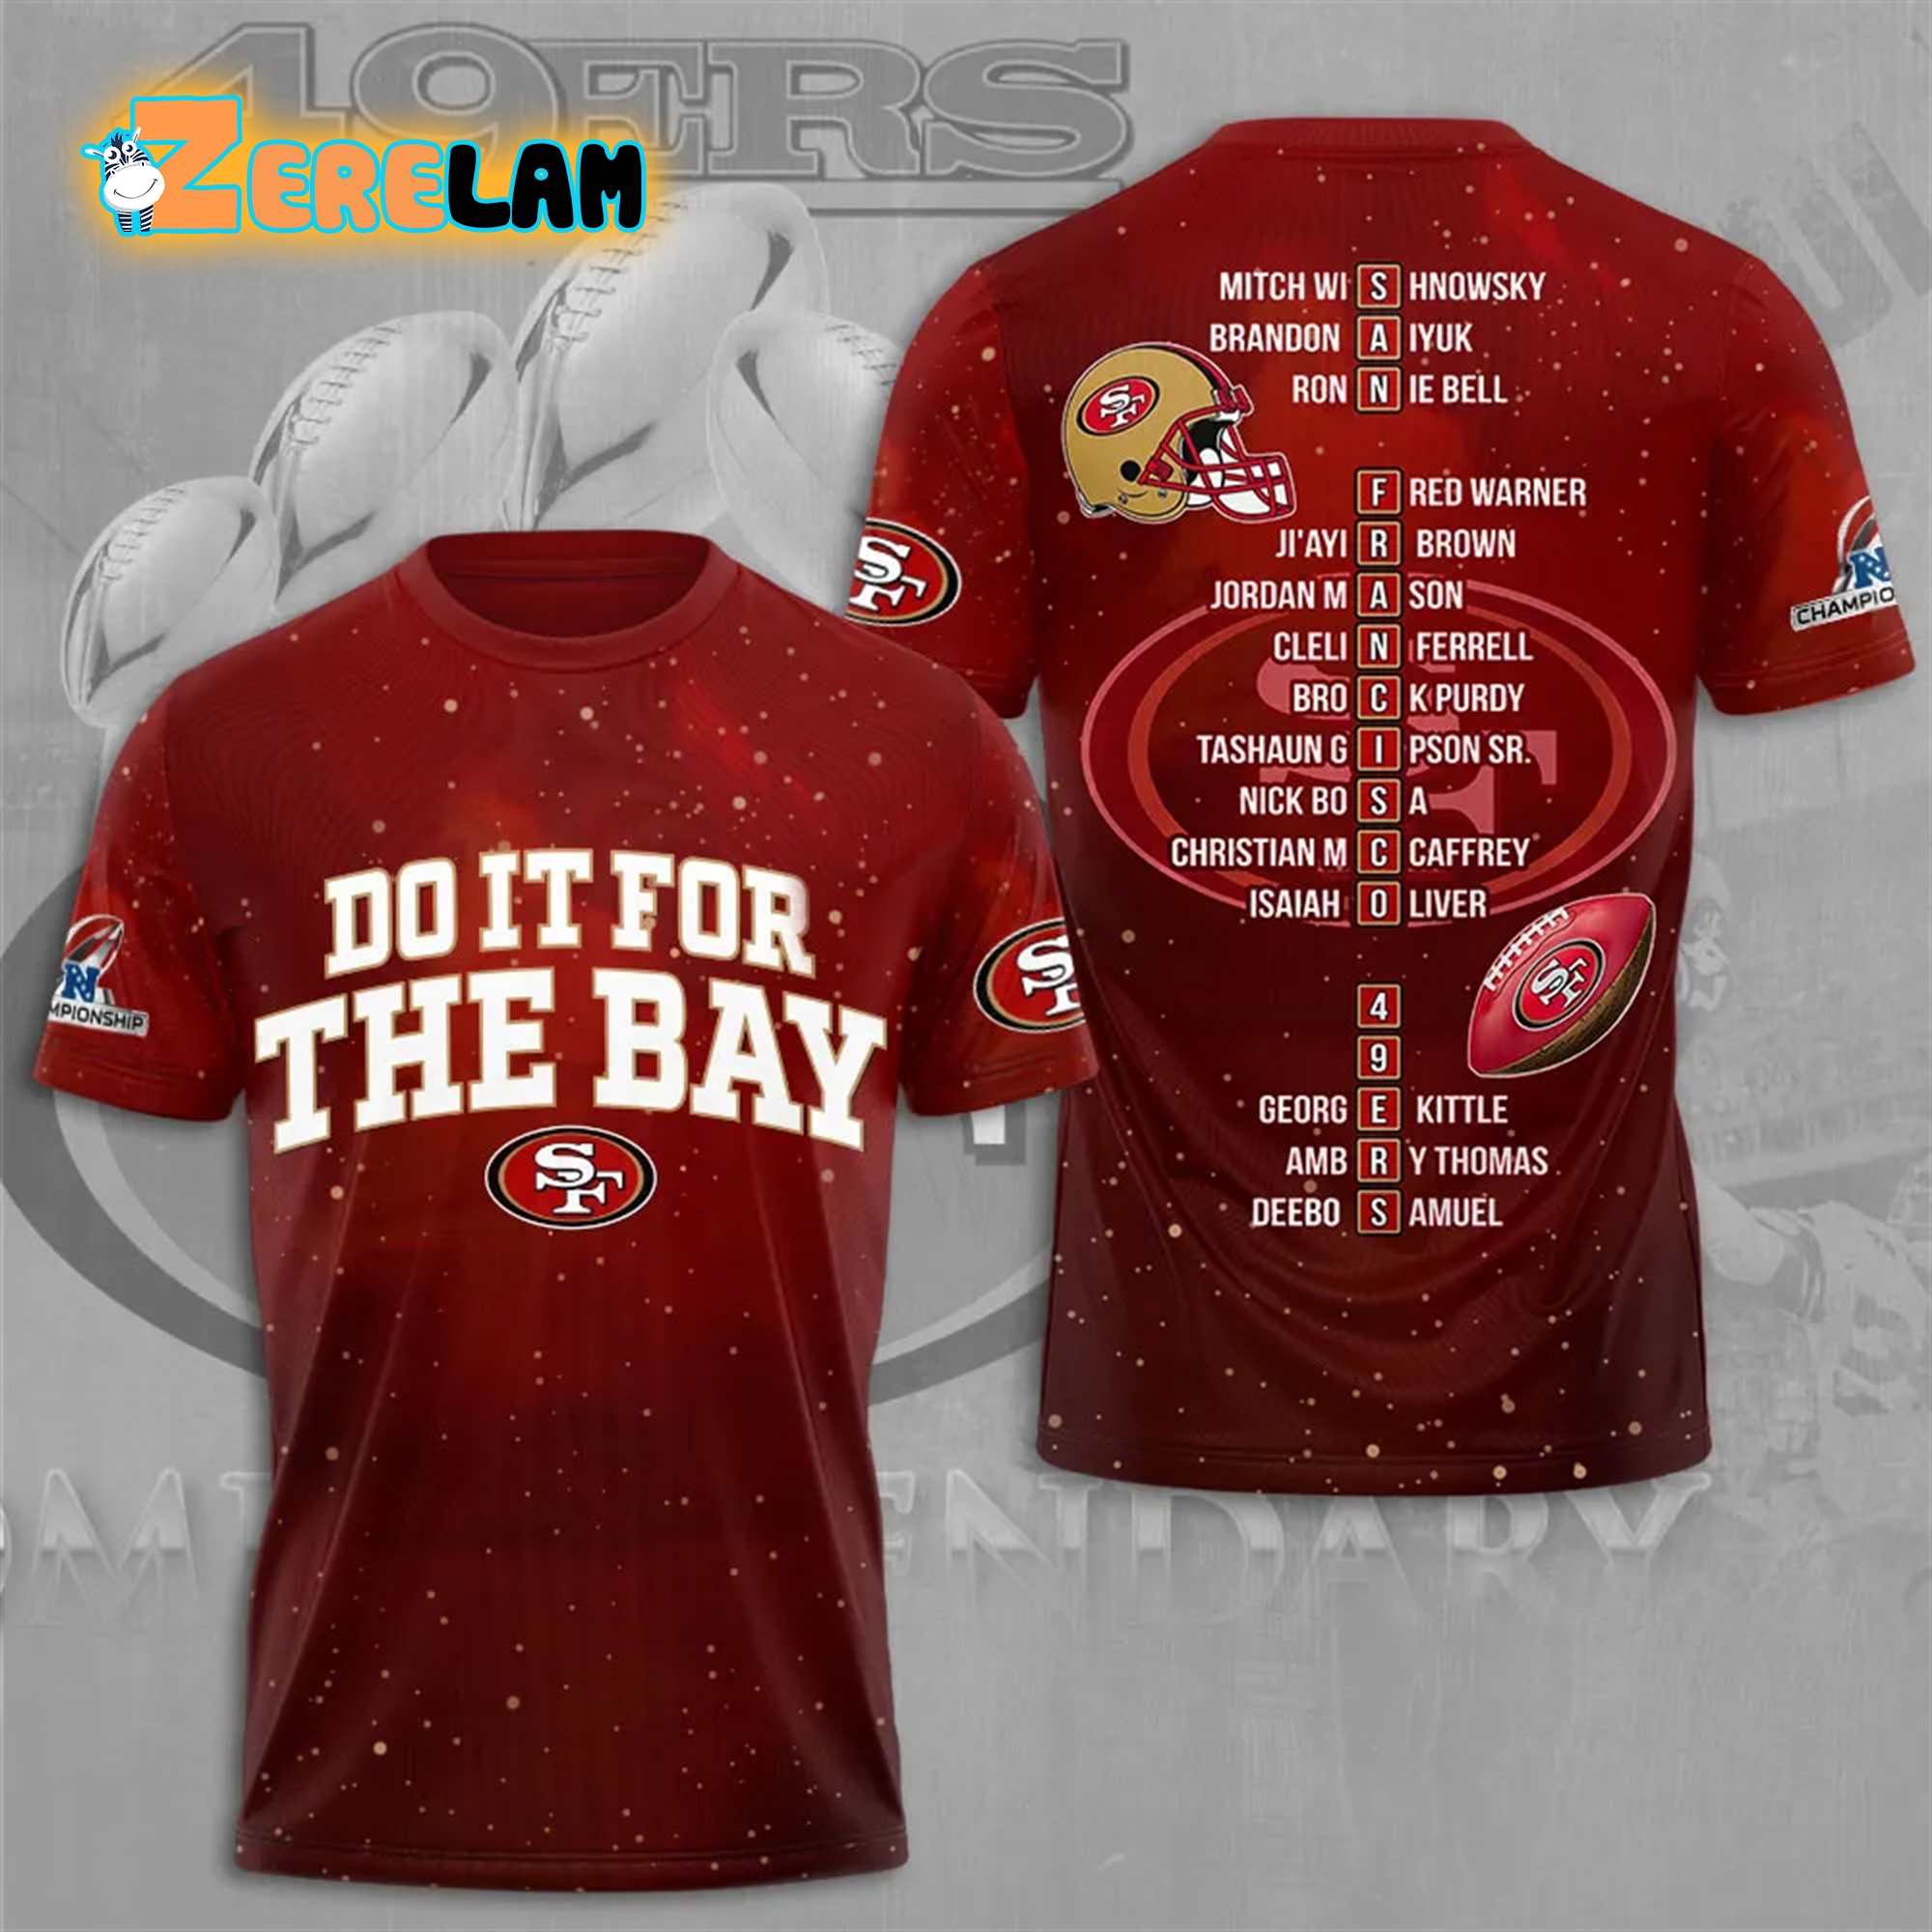 49ers Championship Do It For The Bay Shirt - Zerelam